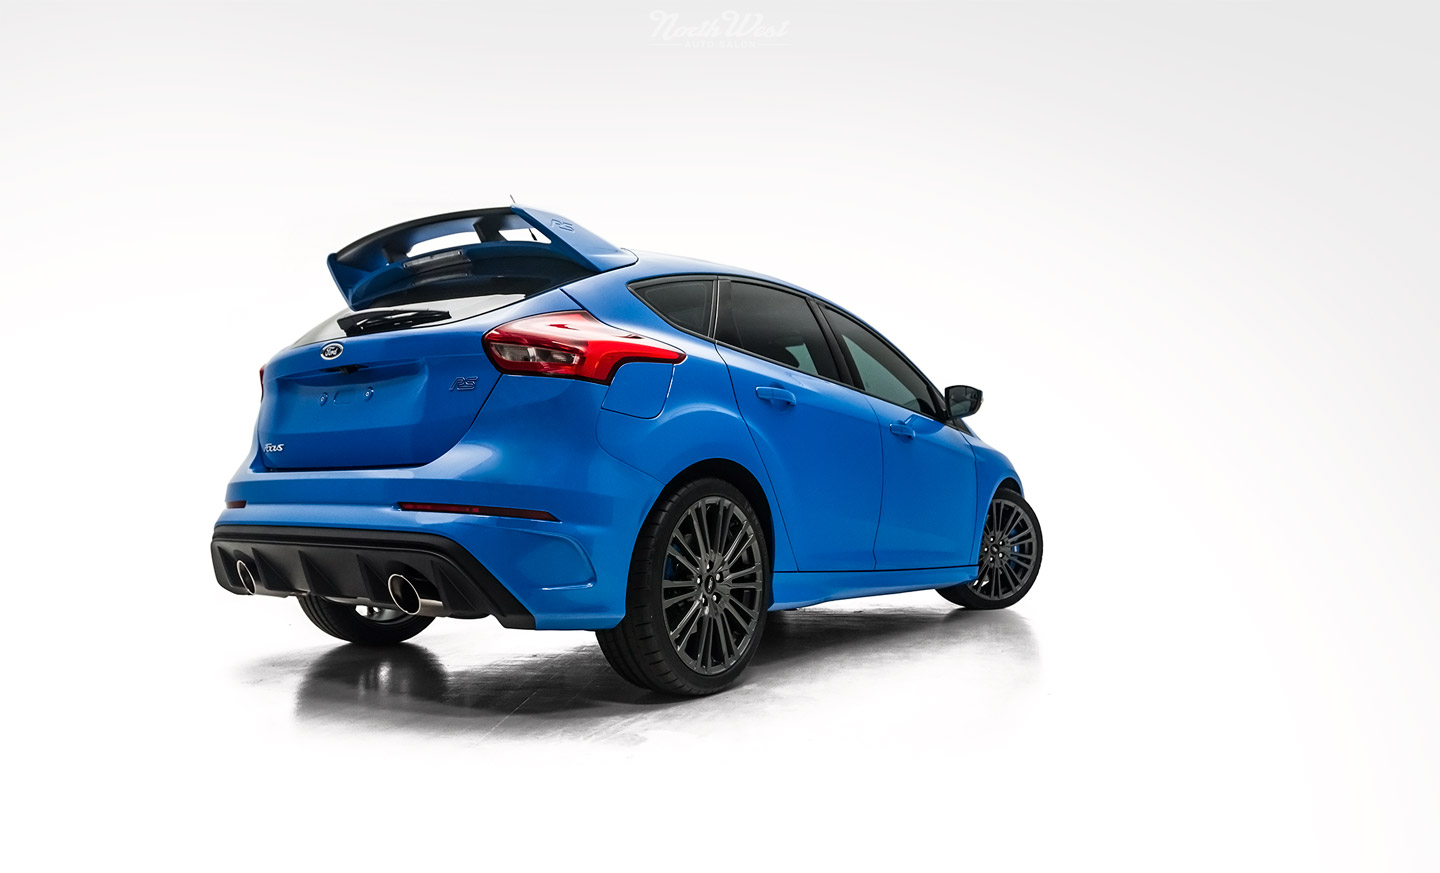 Ford-Focus-RS-new-car-detail-xpel-paint-protection-spectra-photosync-window-tint-ceramic-pro-silver-rear-qtr-s